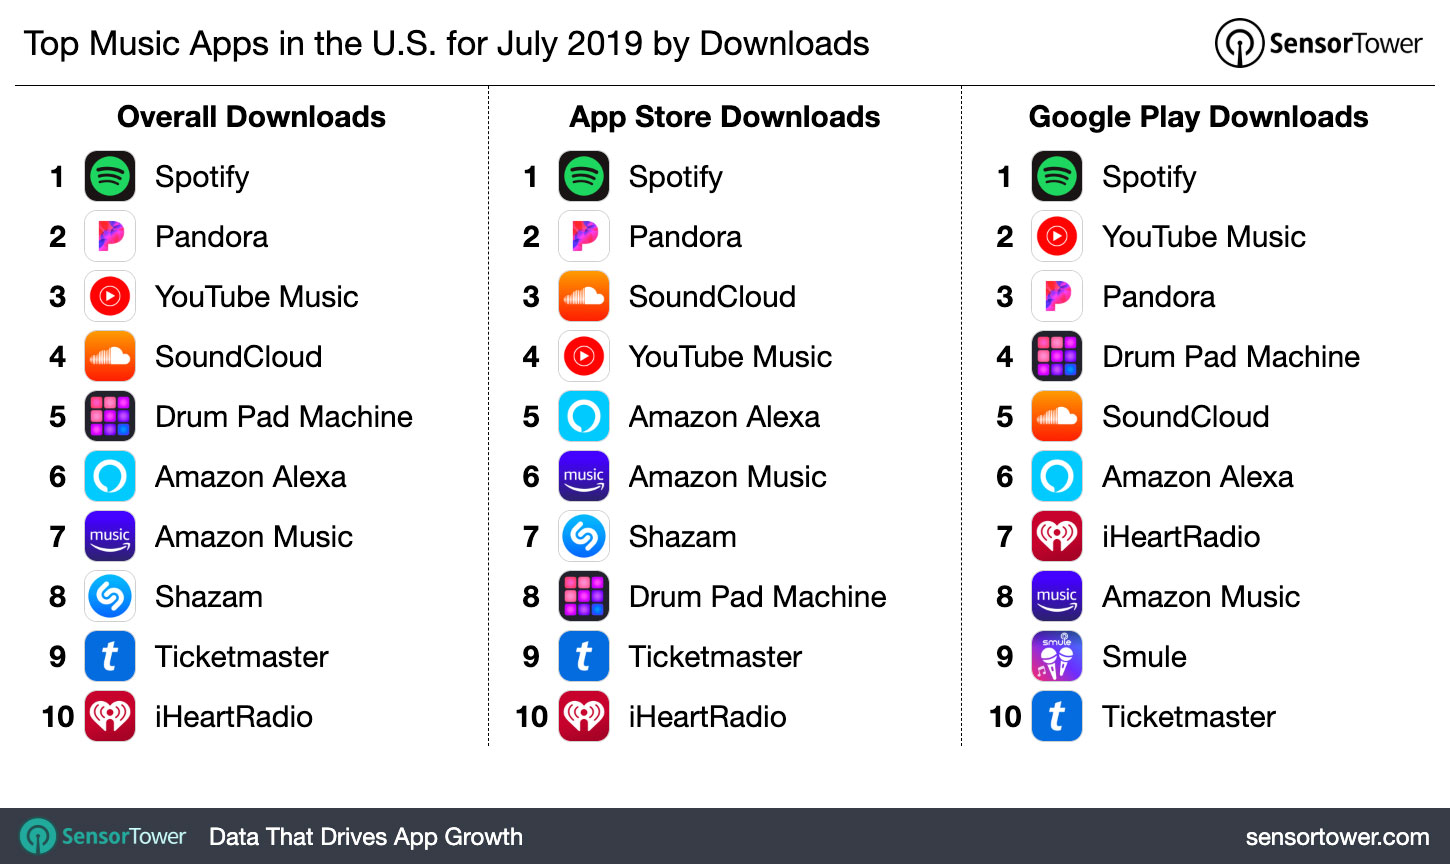 Top Music Category Apps in the U.S. for July 2019 by Downloads